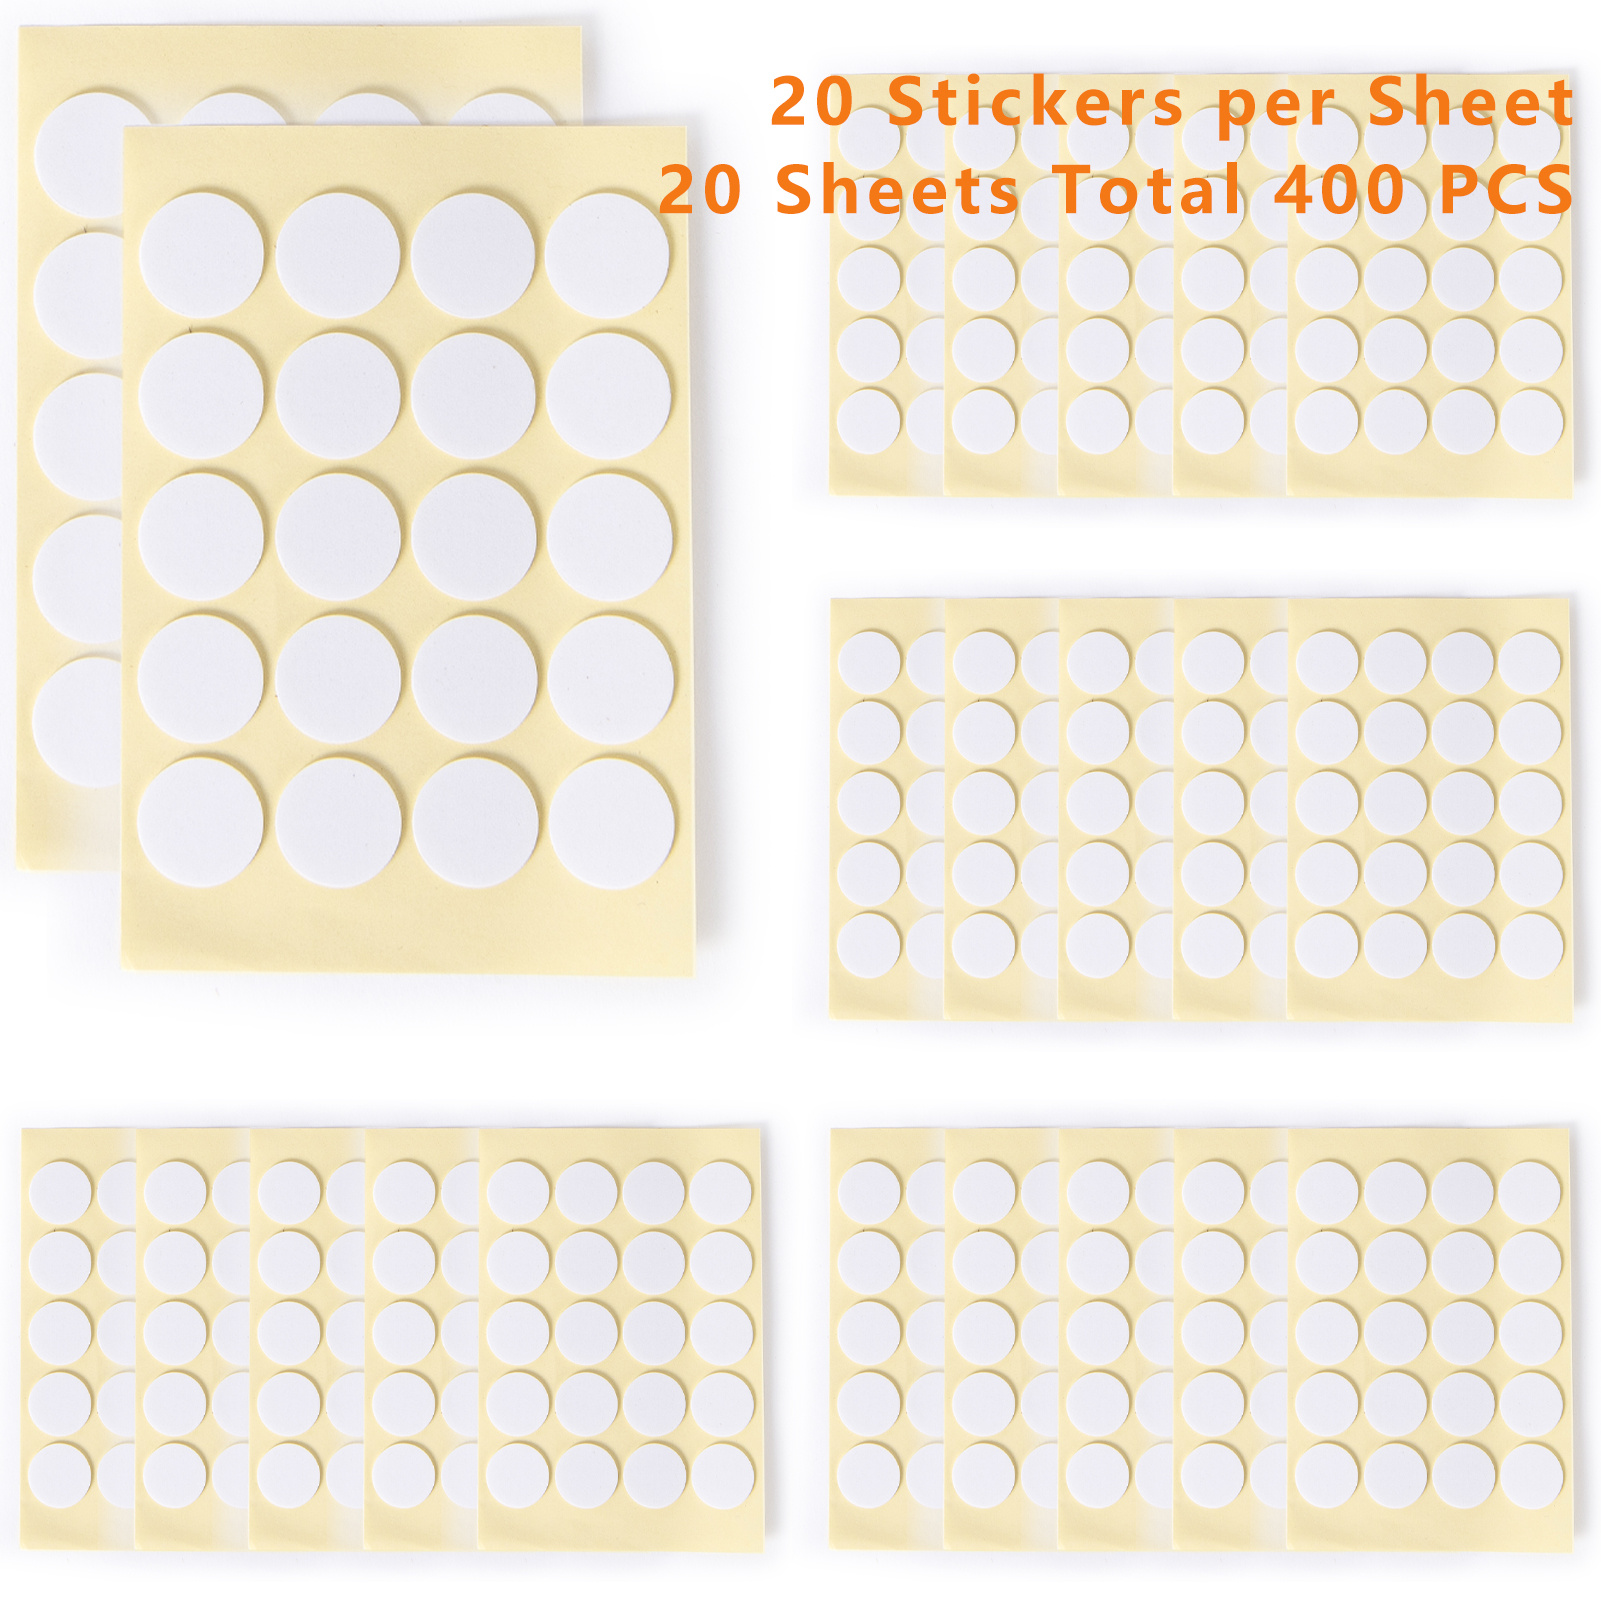 CandleScience Wick Stickers Pro | Wick Adhesive Stickers for Candle Making 120 PC Pack